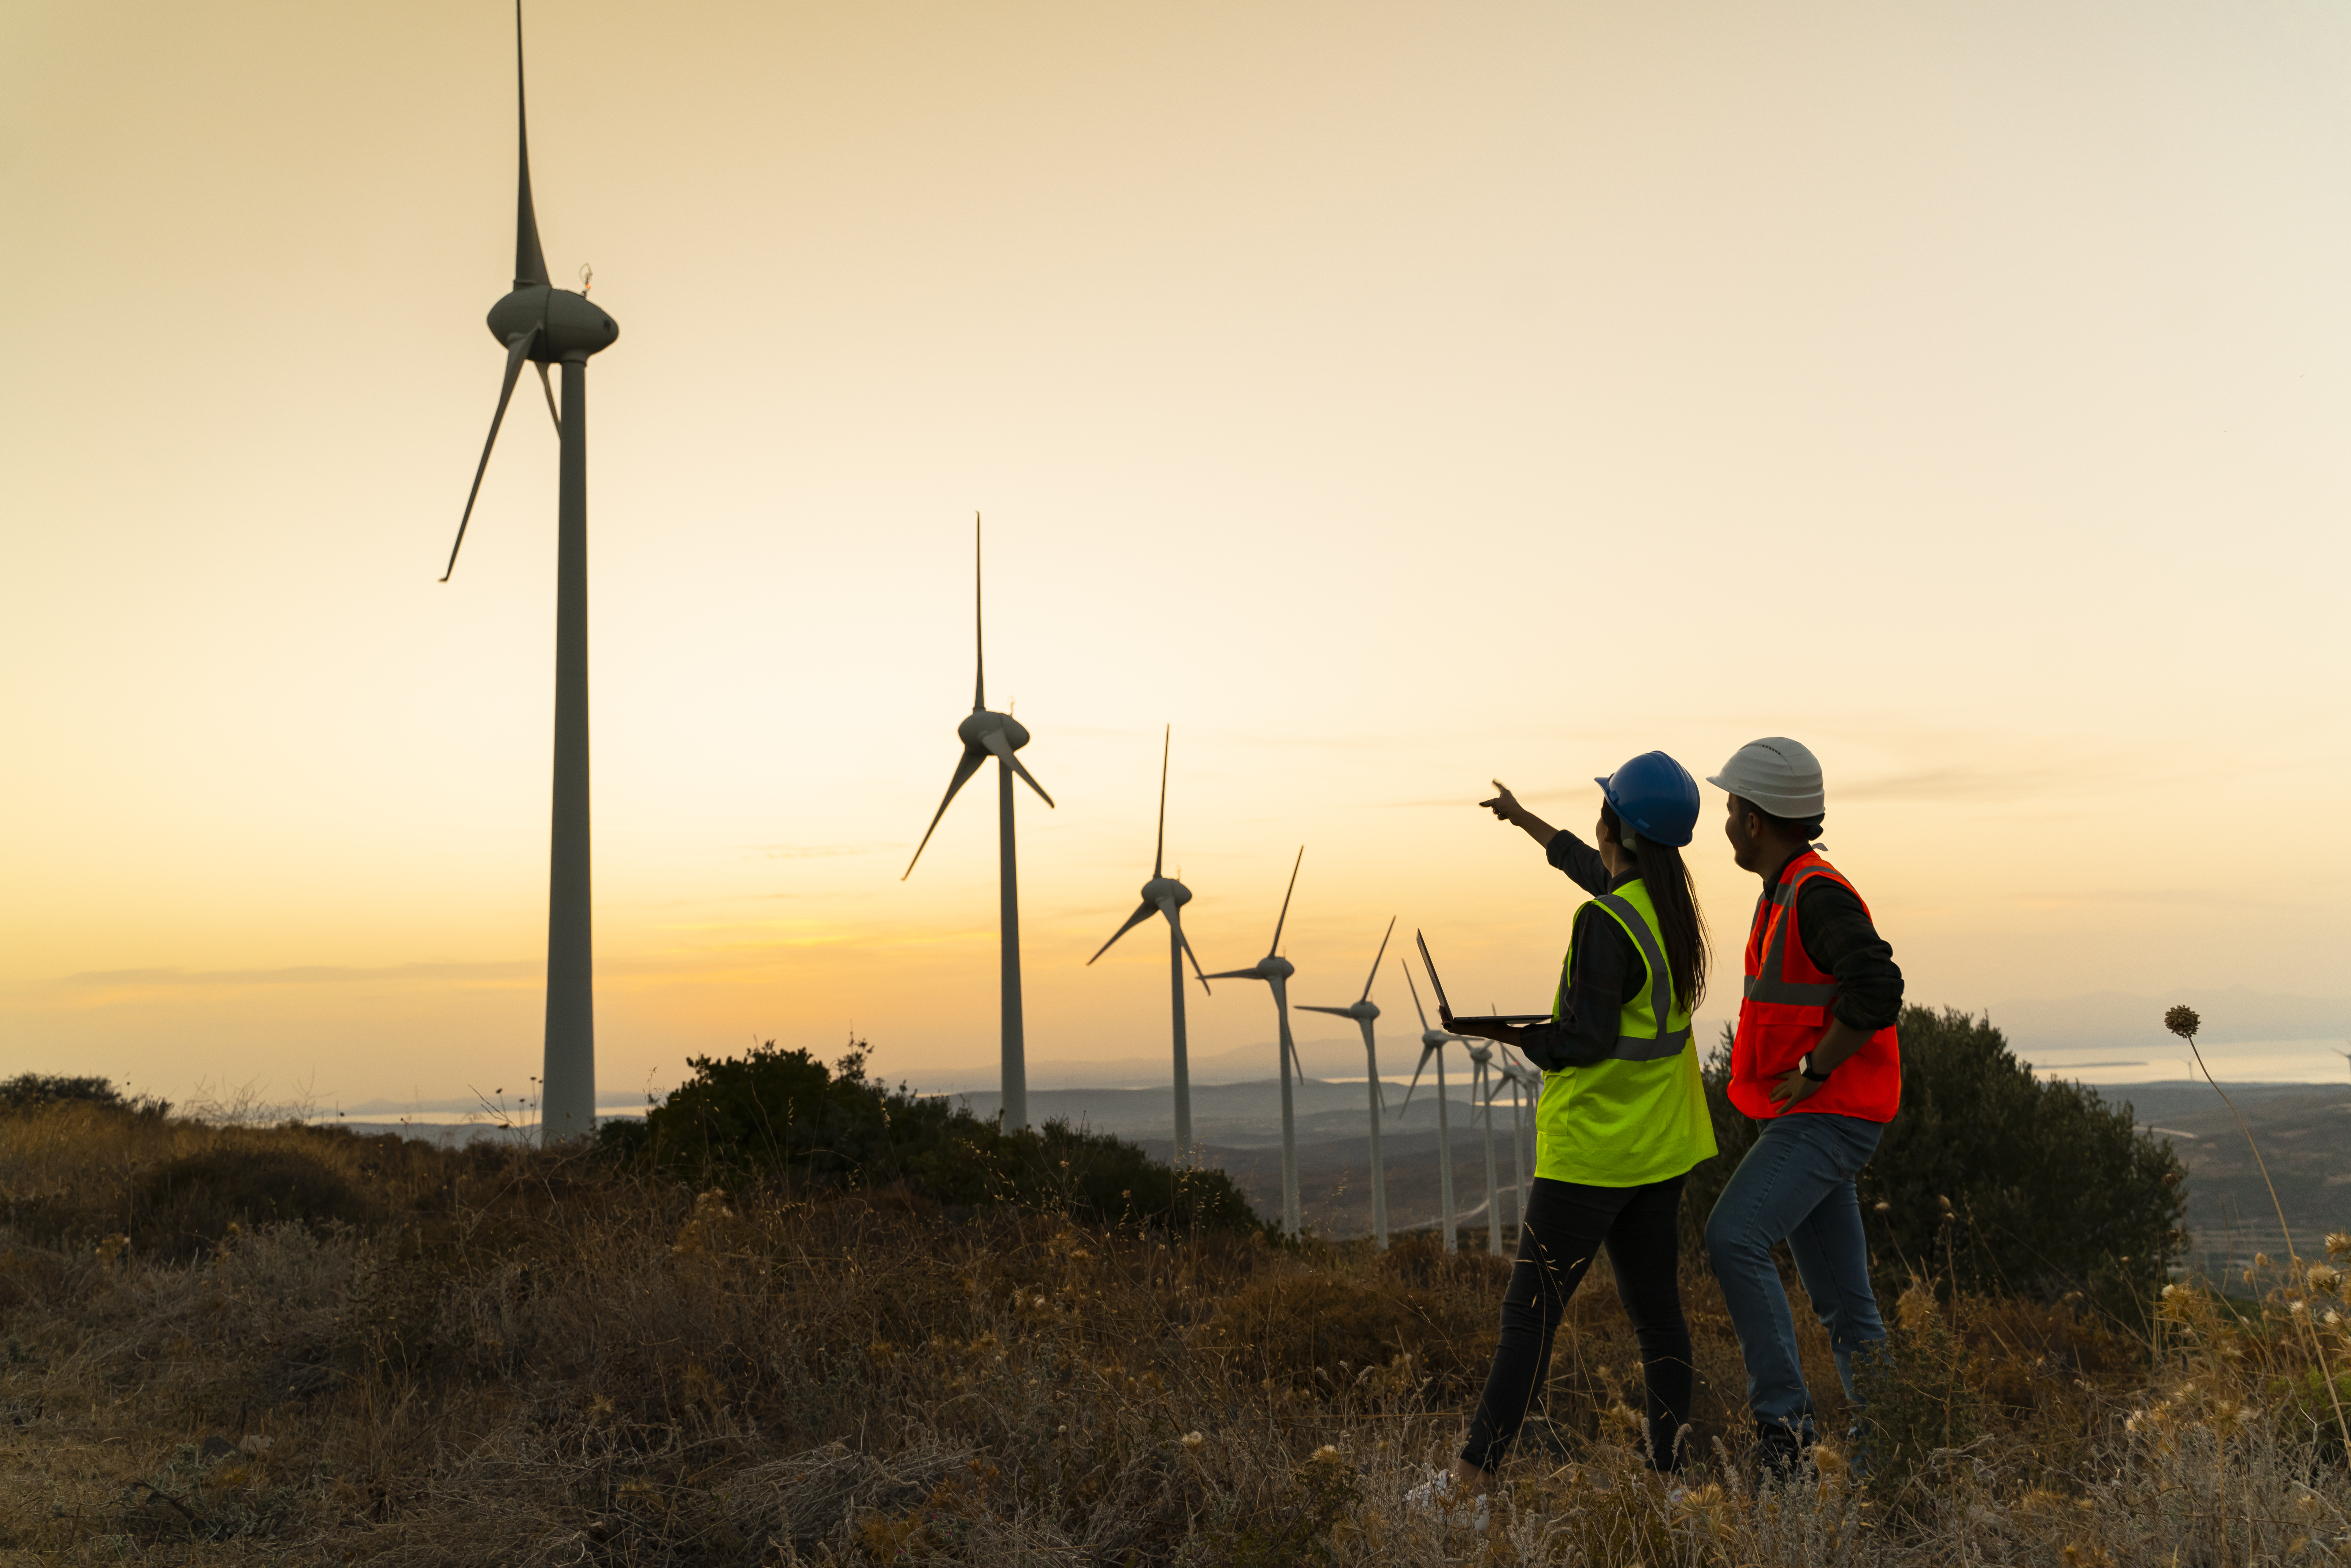 Two workers on iPads examining a line of wind turbines off in the distance.